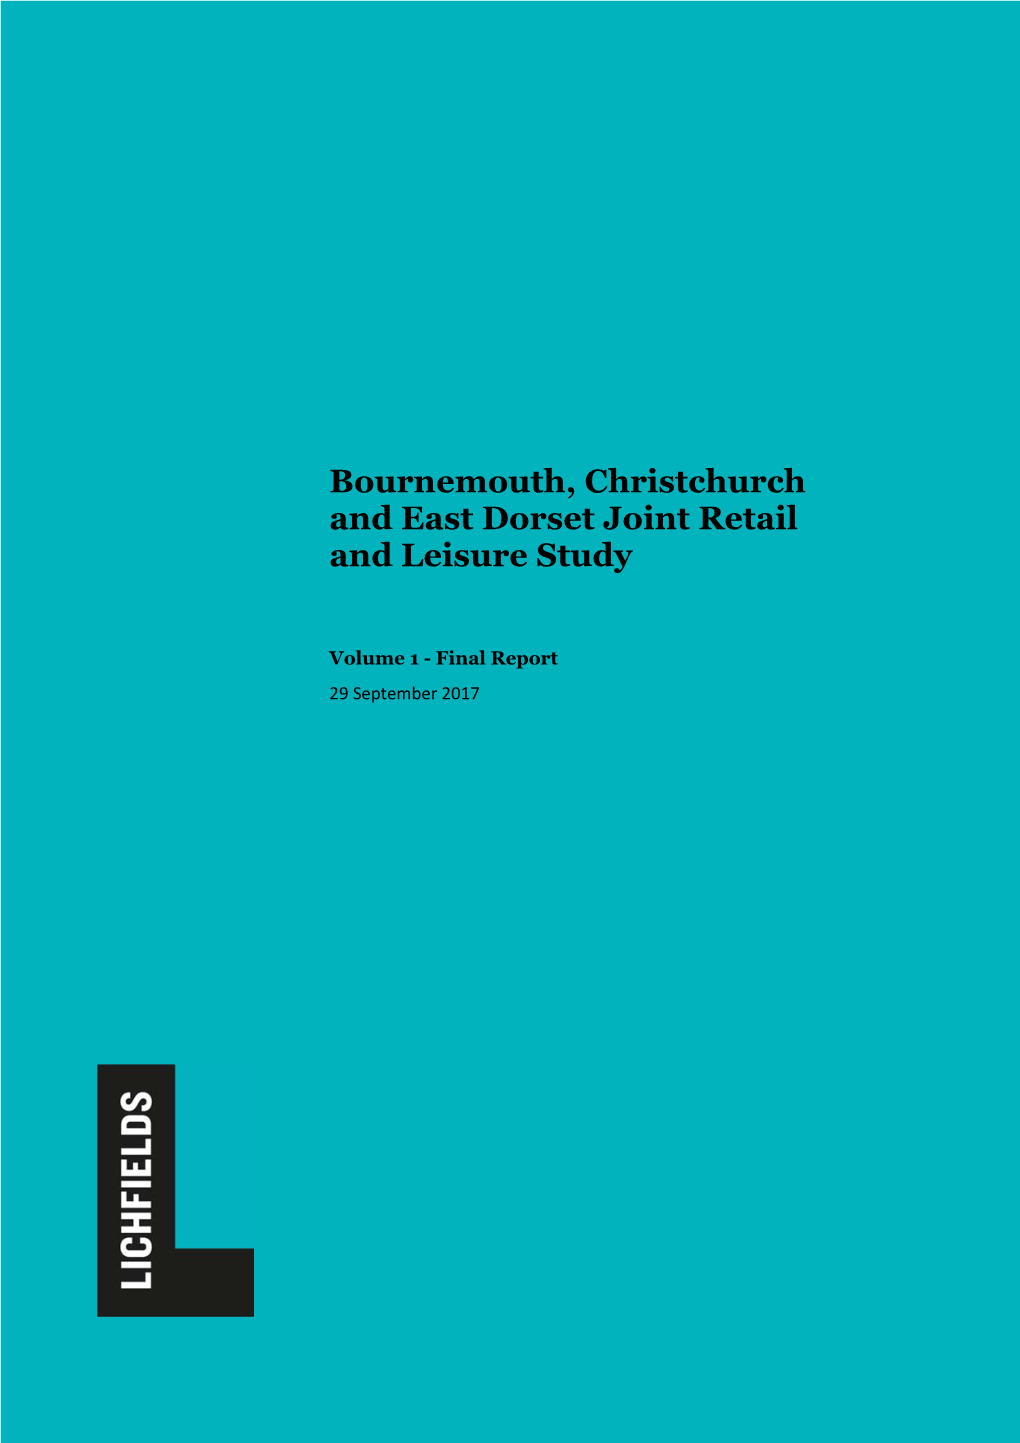 Volume 1 Bournemouth, Christchurch and East Dorset Joint Retail And